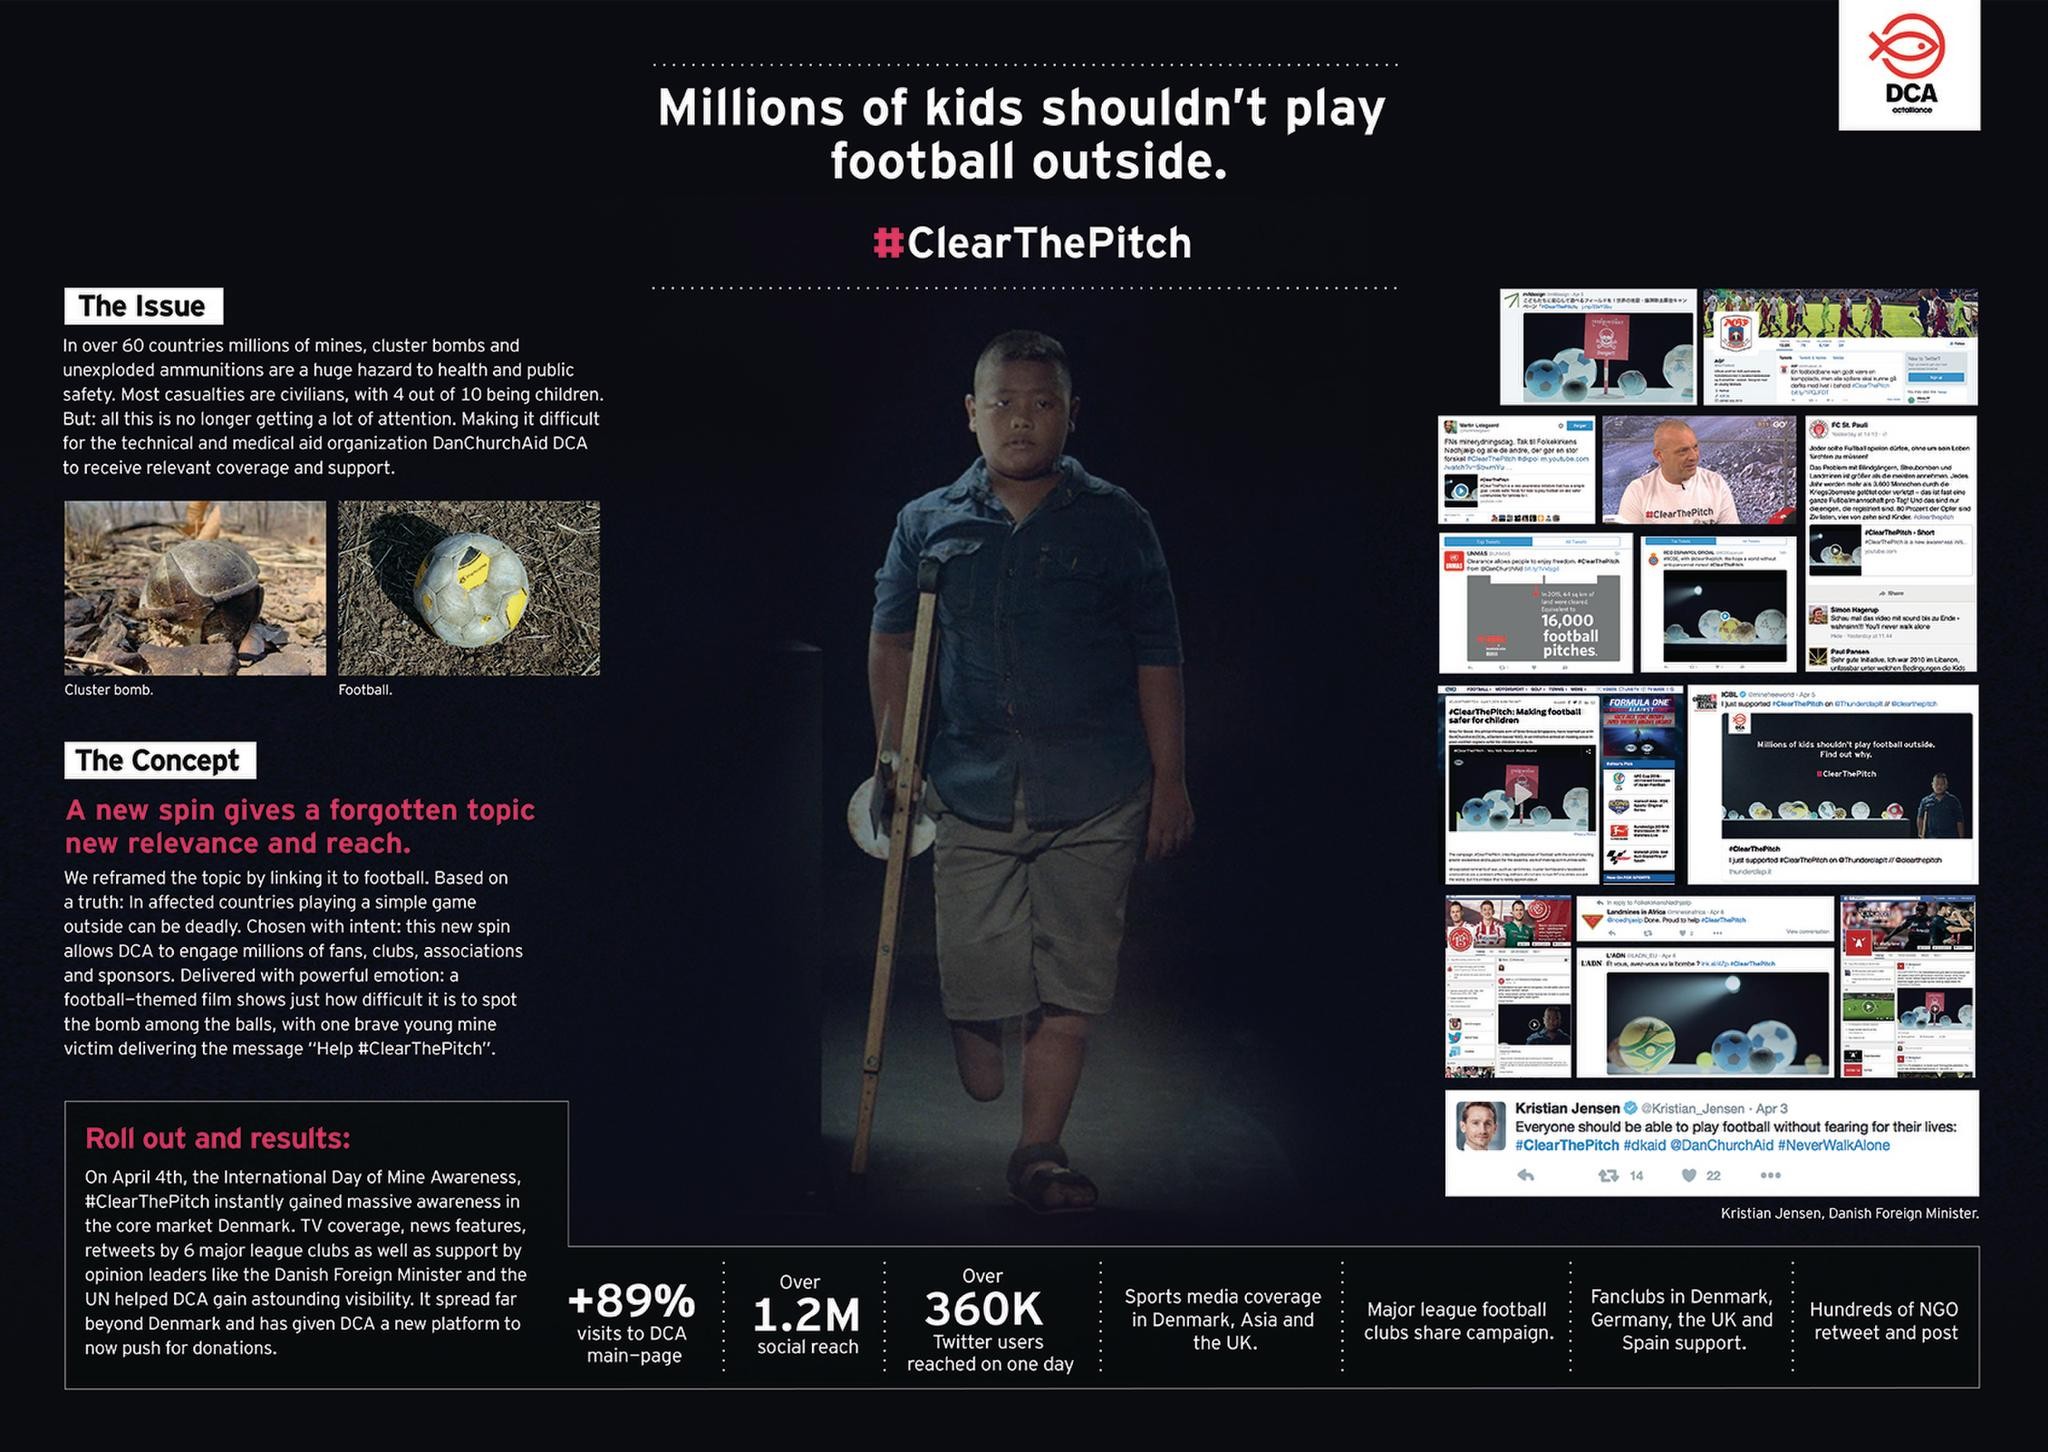 Campaign "#ClearThePitch"